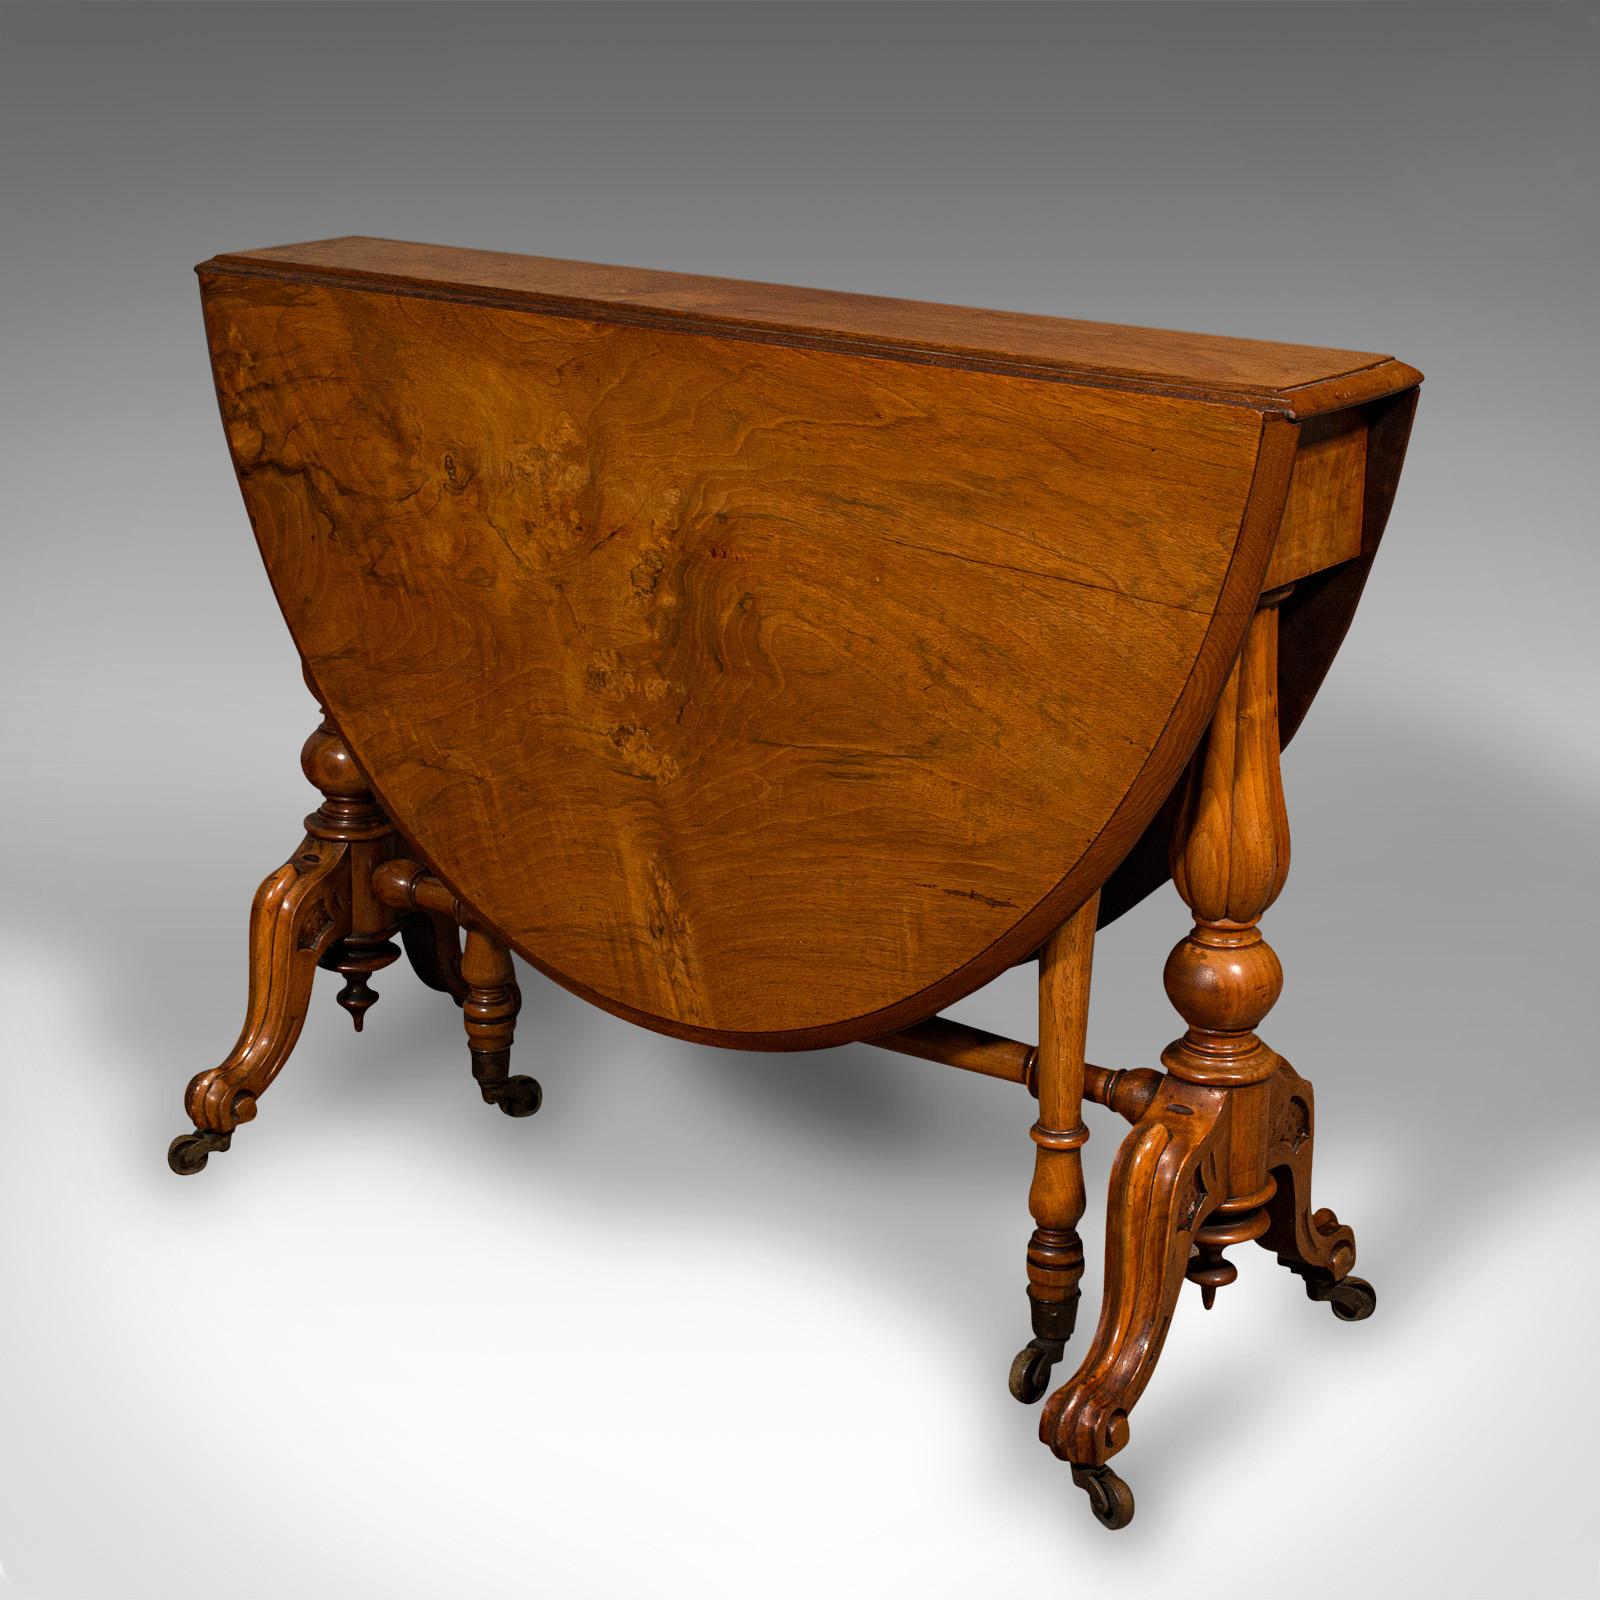 This is an antique Sutherland table. An English, burr walnut gate-leg oval occasional table, dating to the early Victorian period, circa 1850.

Rich in colour and exuding fine craftsmanship
Displays a desirable aged patina and in very good